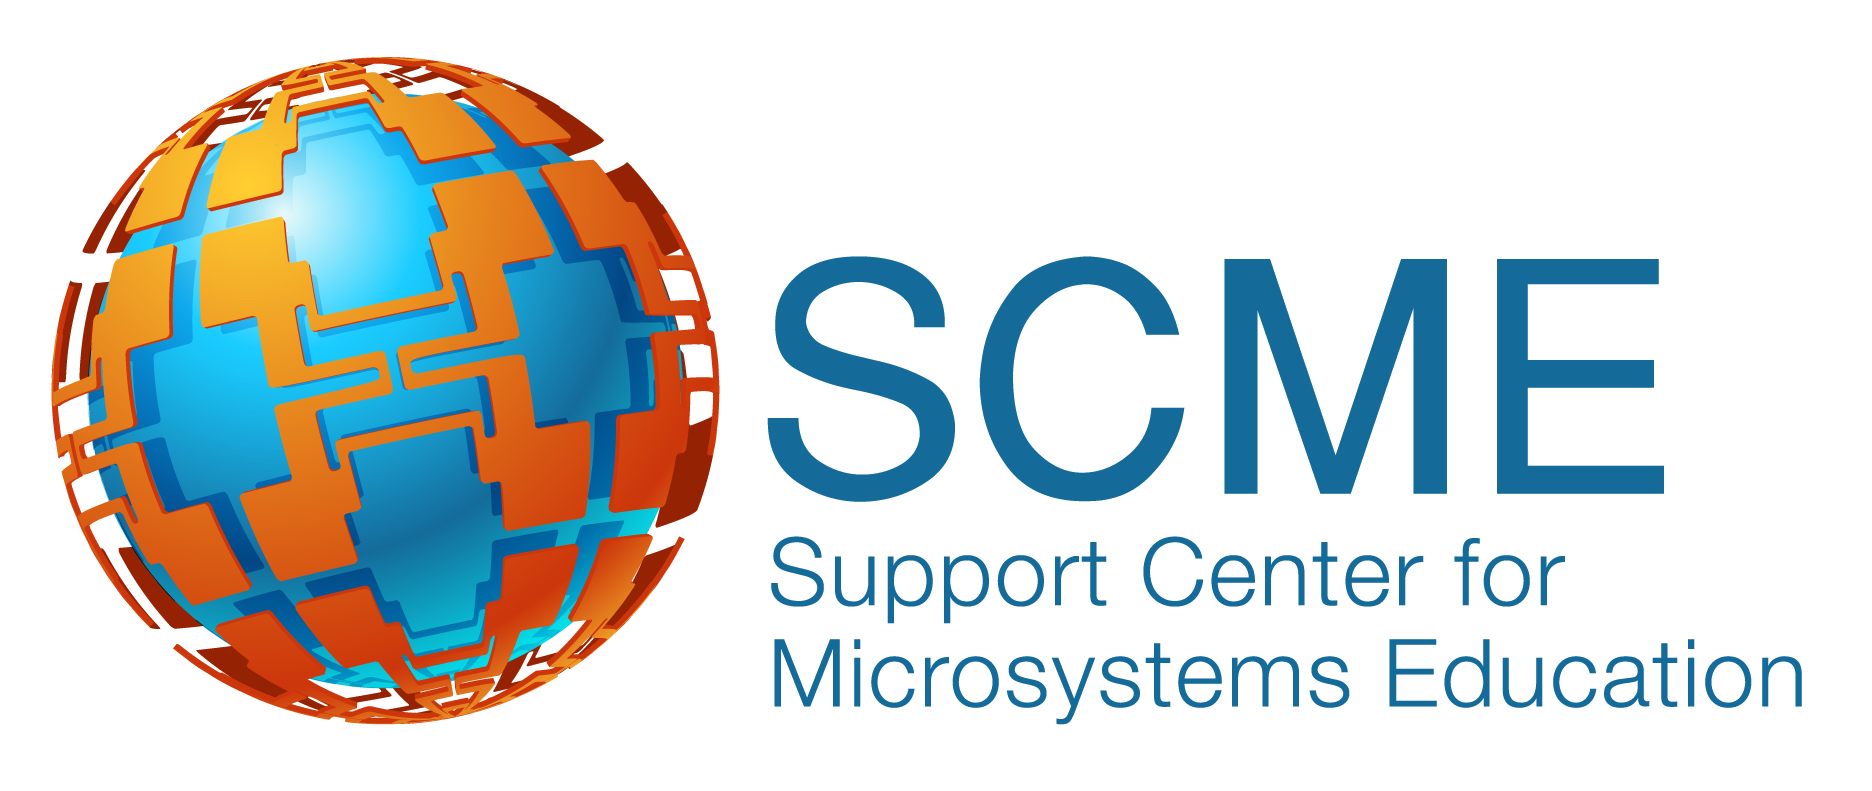 Support Center for Microsystems Education (SCME) Logo